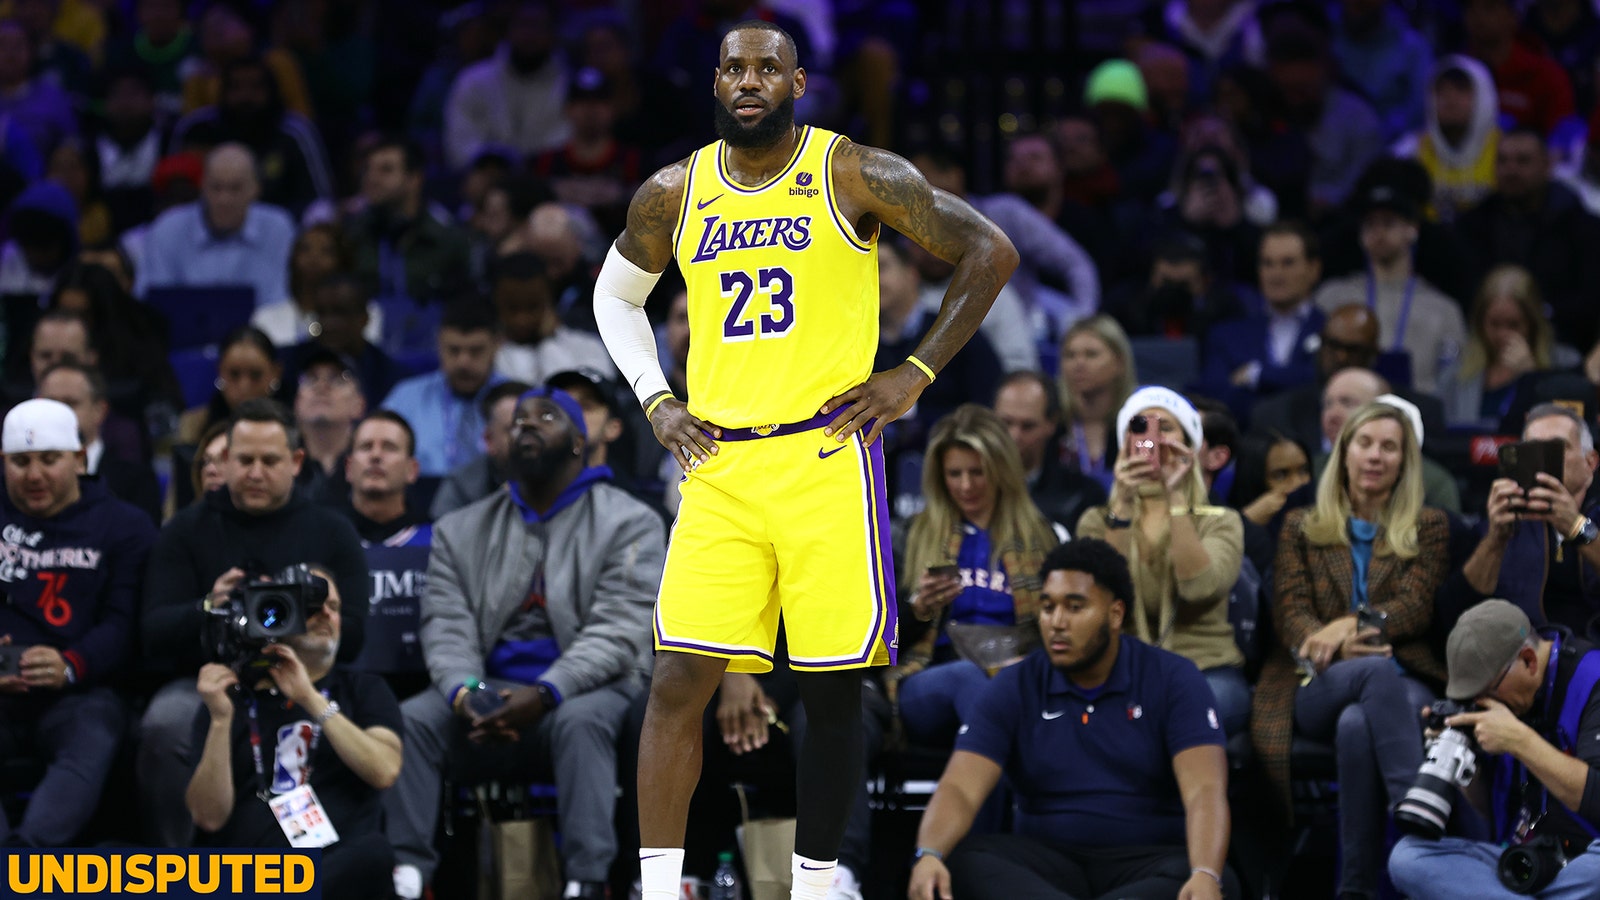 Lakers lose to 76ers by 44 points: LeBron’s worst career loss